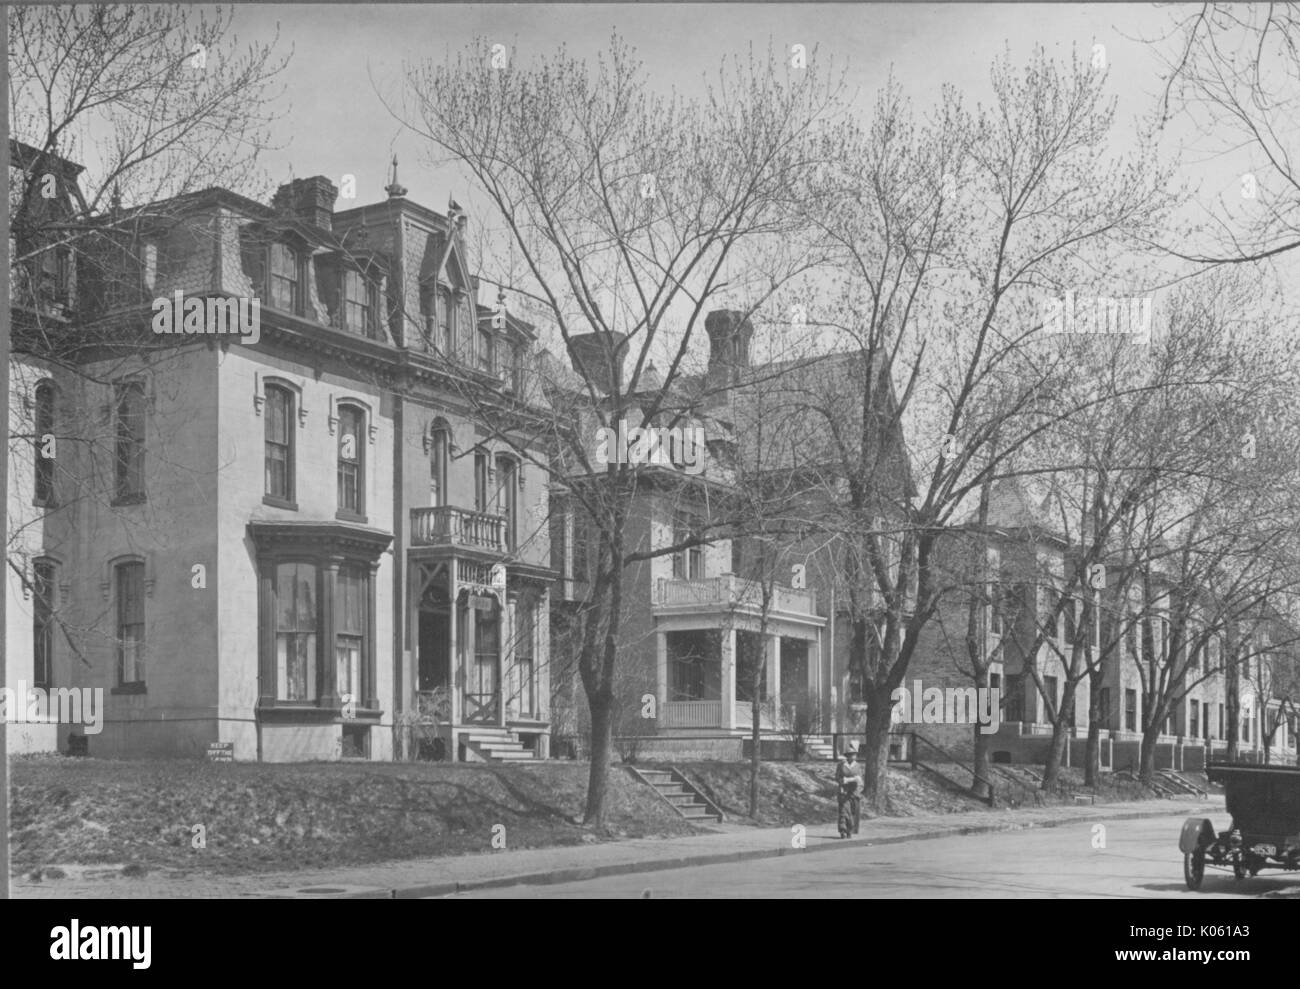 Homes parallel the street in the foreground, the homes are all at least two-story and they are very close to each other, trees lie between the street and the homes, a buggy is located in the bottom right of the photo, United States, 1950. This image is from a series documenting the construction and sale of homes in the Roland Park/Guilford neighborhood of Baltimore, a streetcar suburb and one of the first planned communities in the United States. Stock Photo